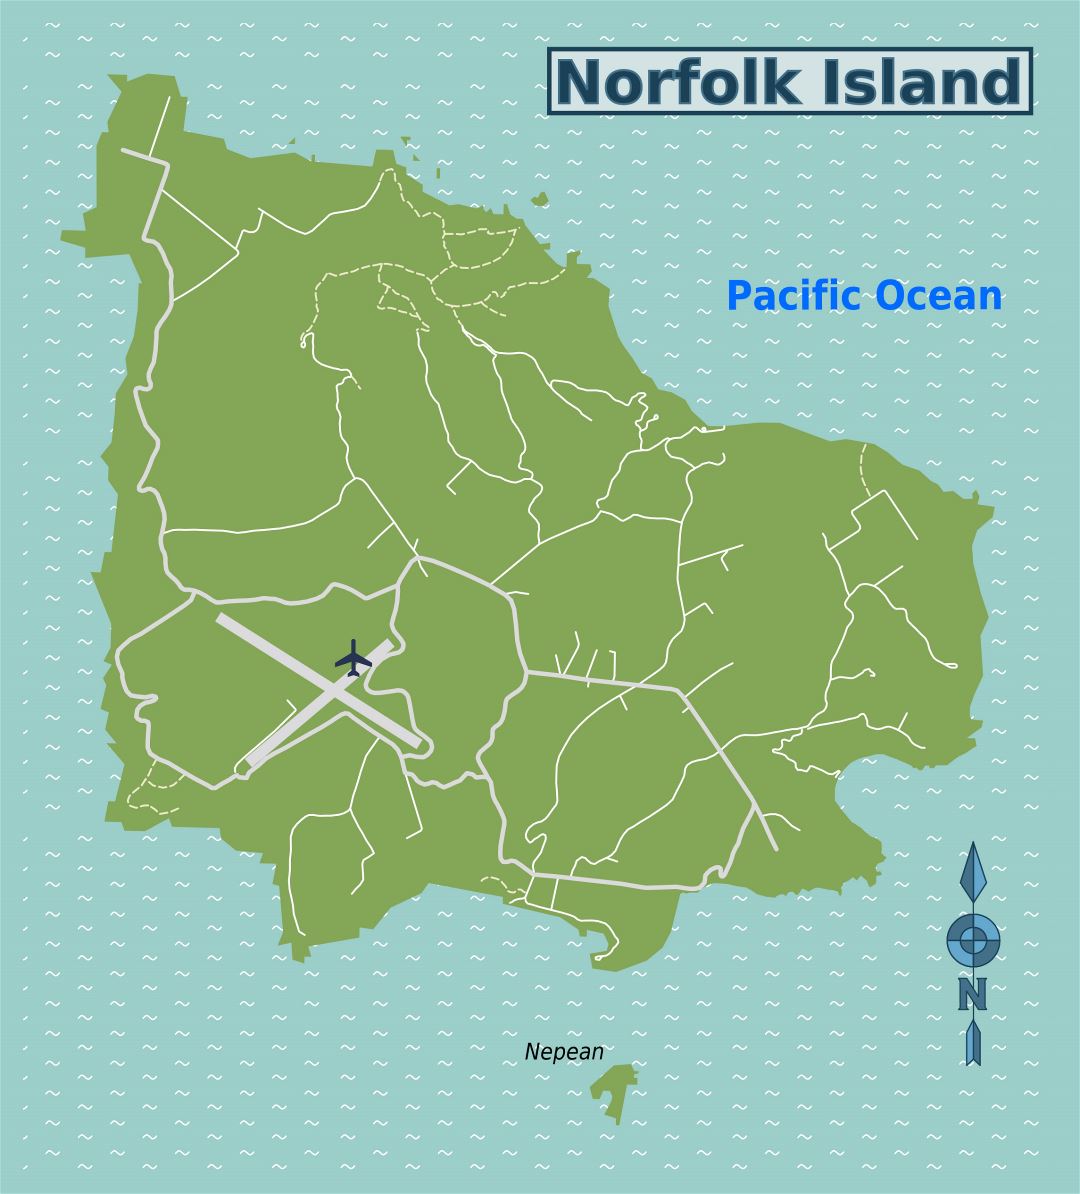 Large map of Norfolk Island with roads and airport